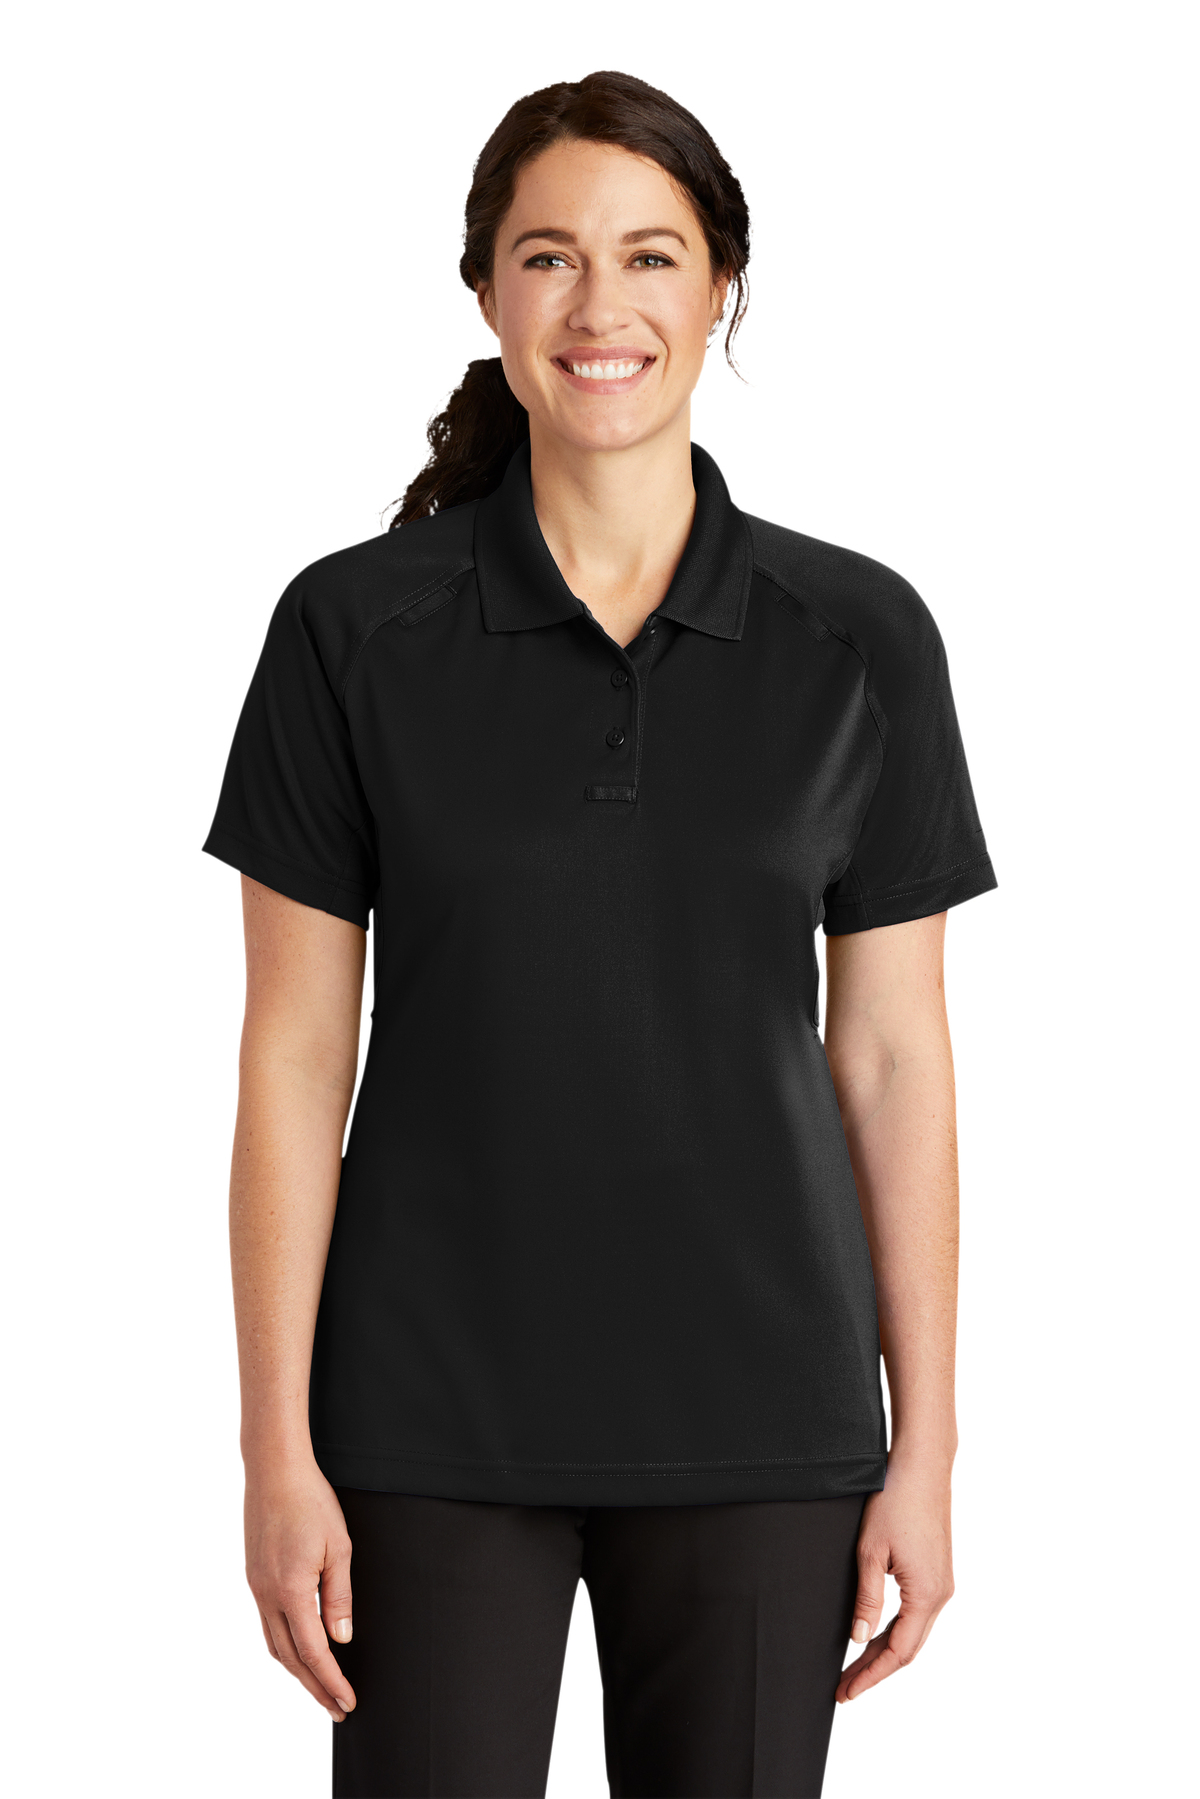 CornerStone Embroidered Women's Select Snag-Proof Tactical Polo ...